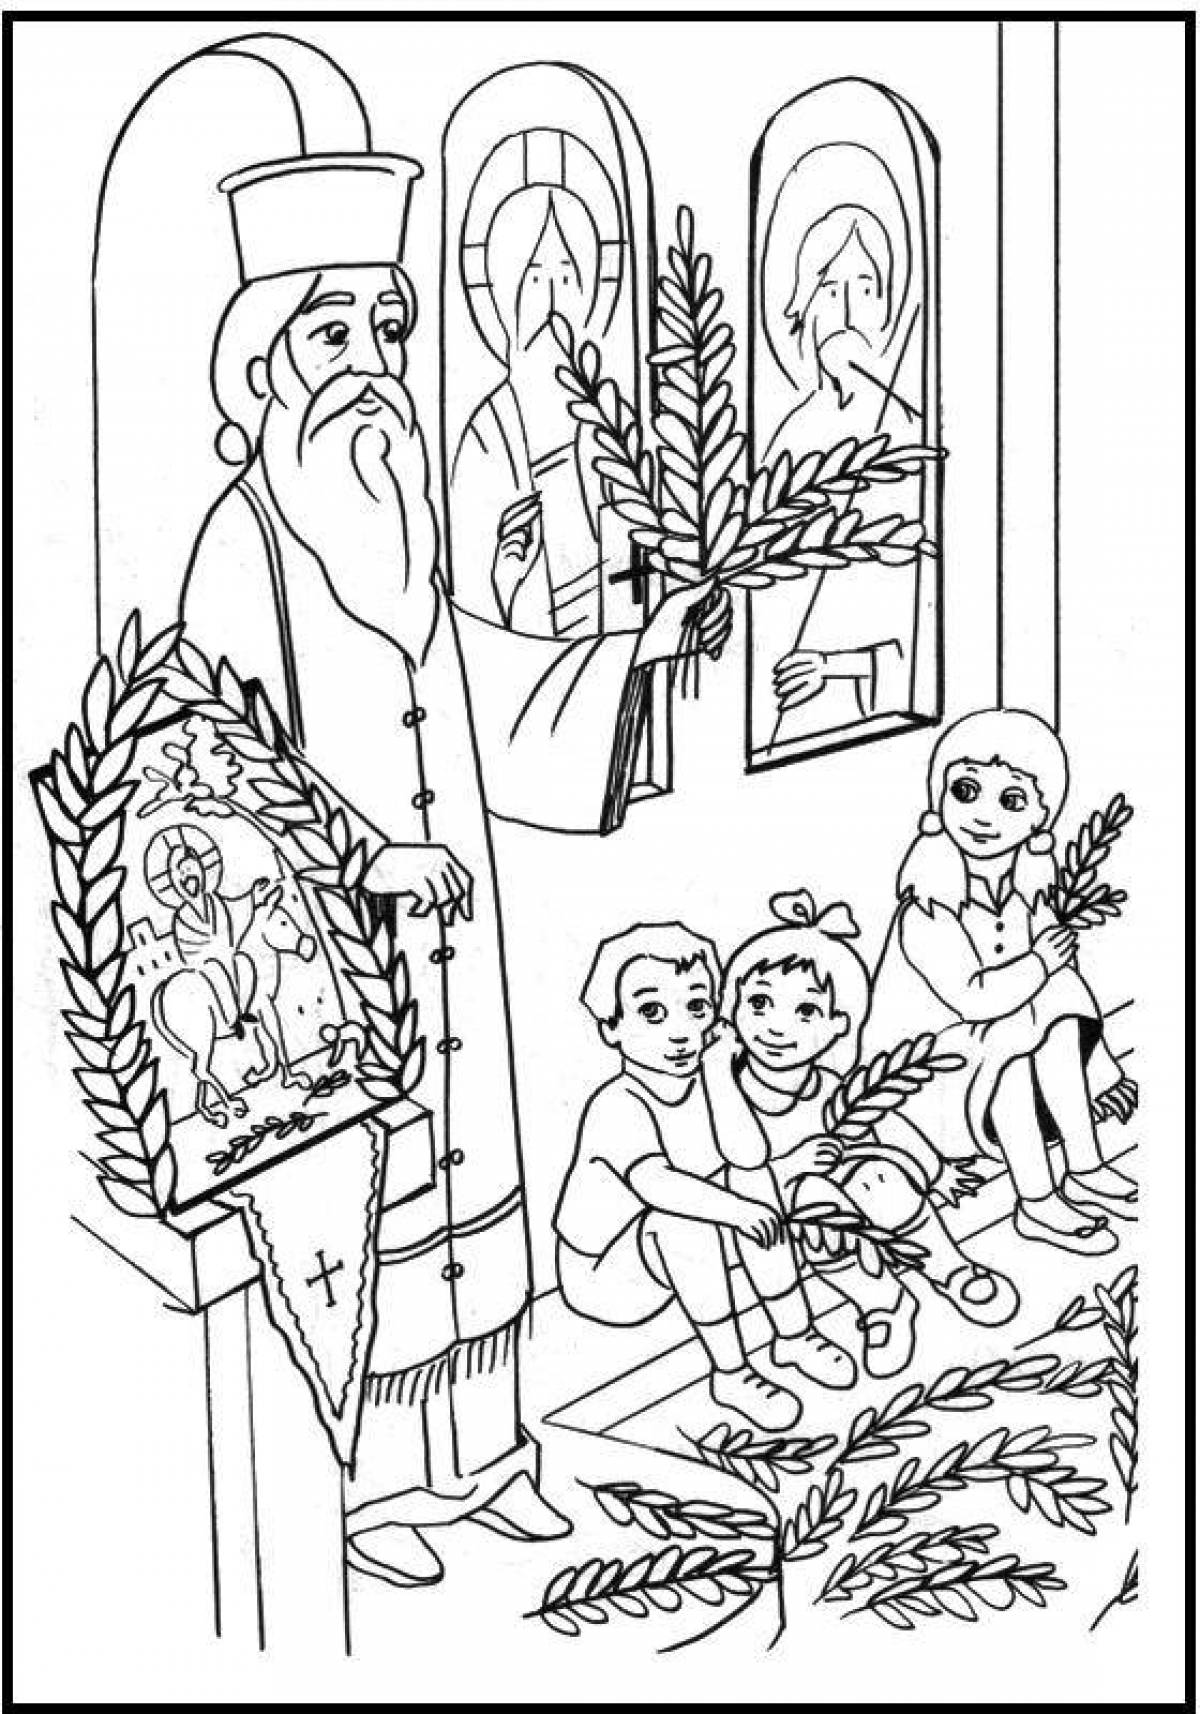 Tempting Orthodox coloring book